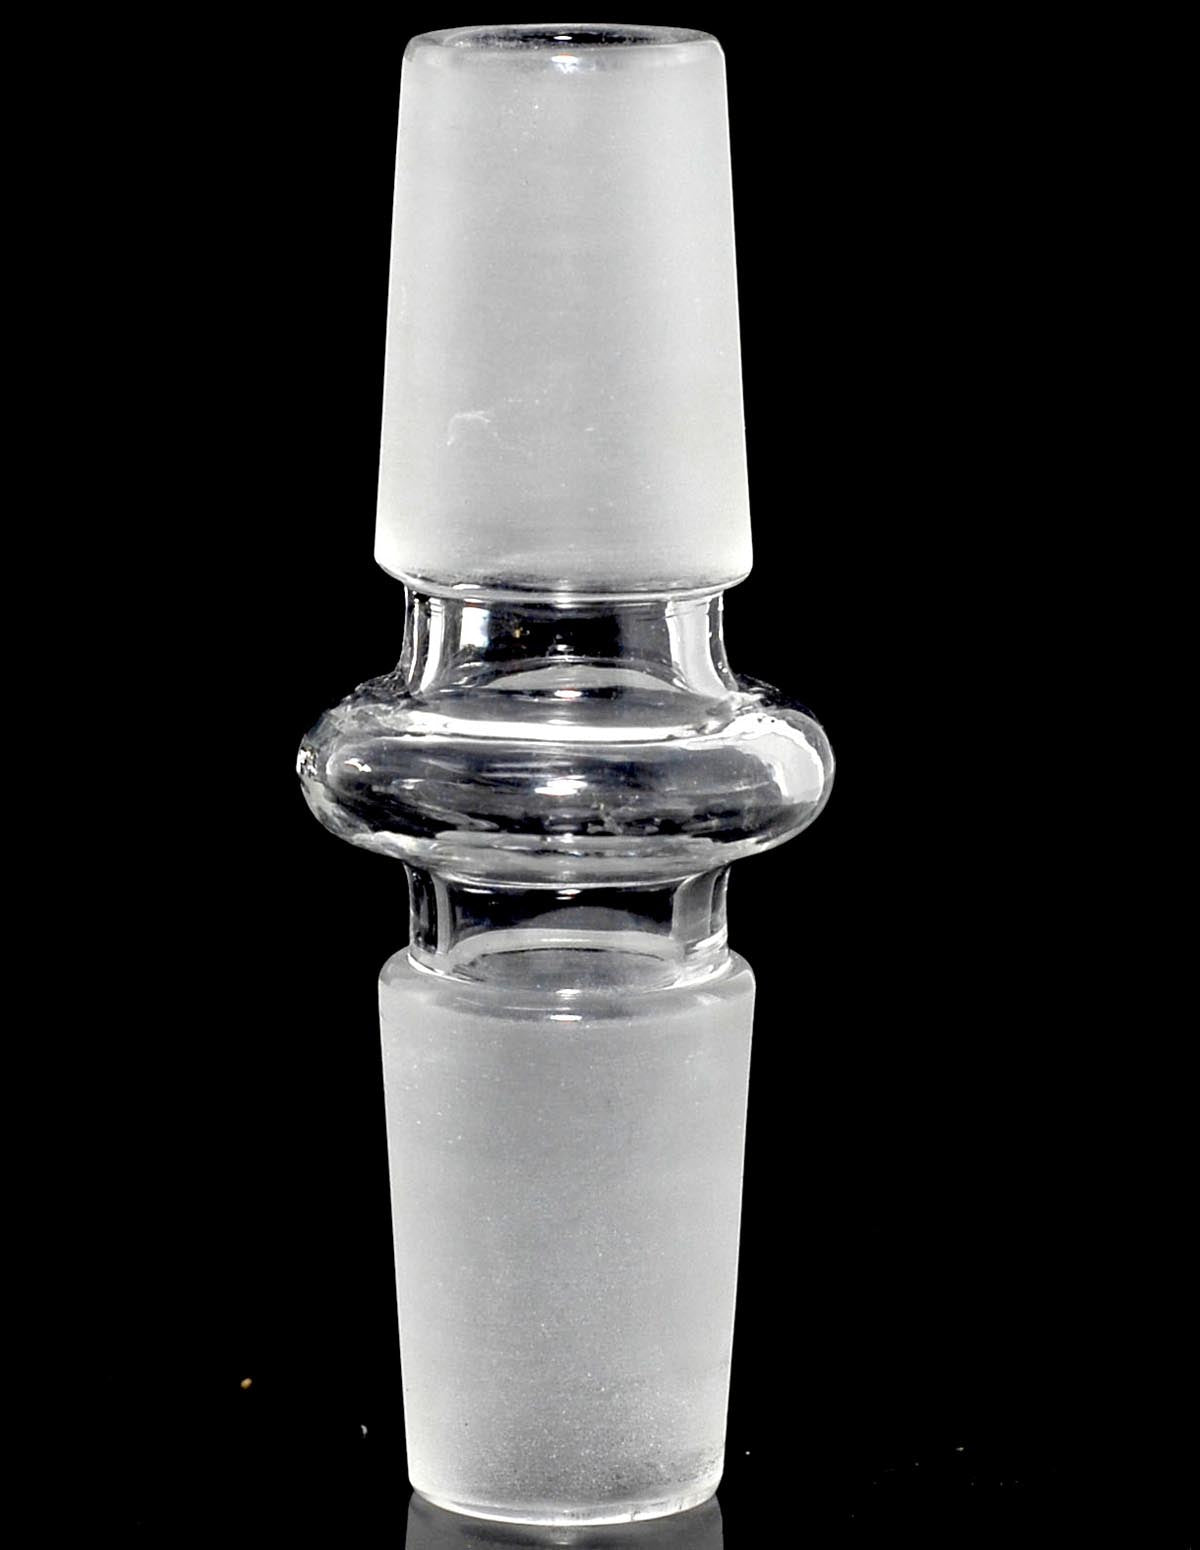 Male to Male Glass on Glass Pipe adapter Conveter